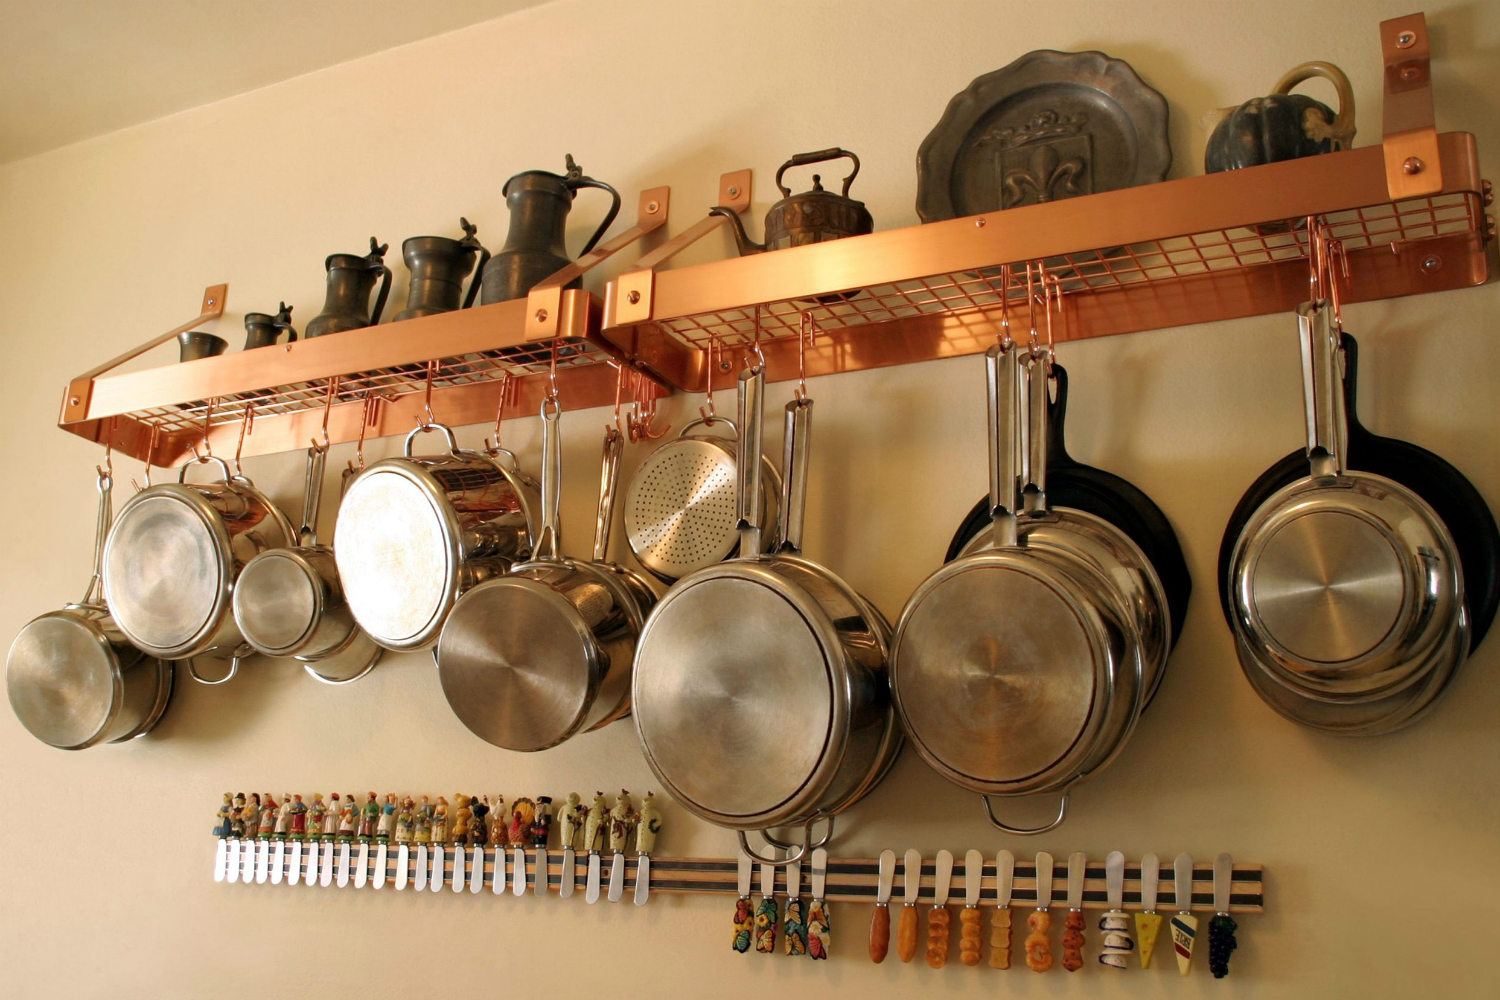 major mom is a company of professional organizers organized kitchen pots and pans